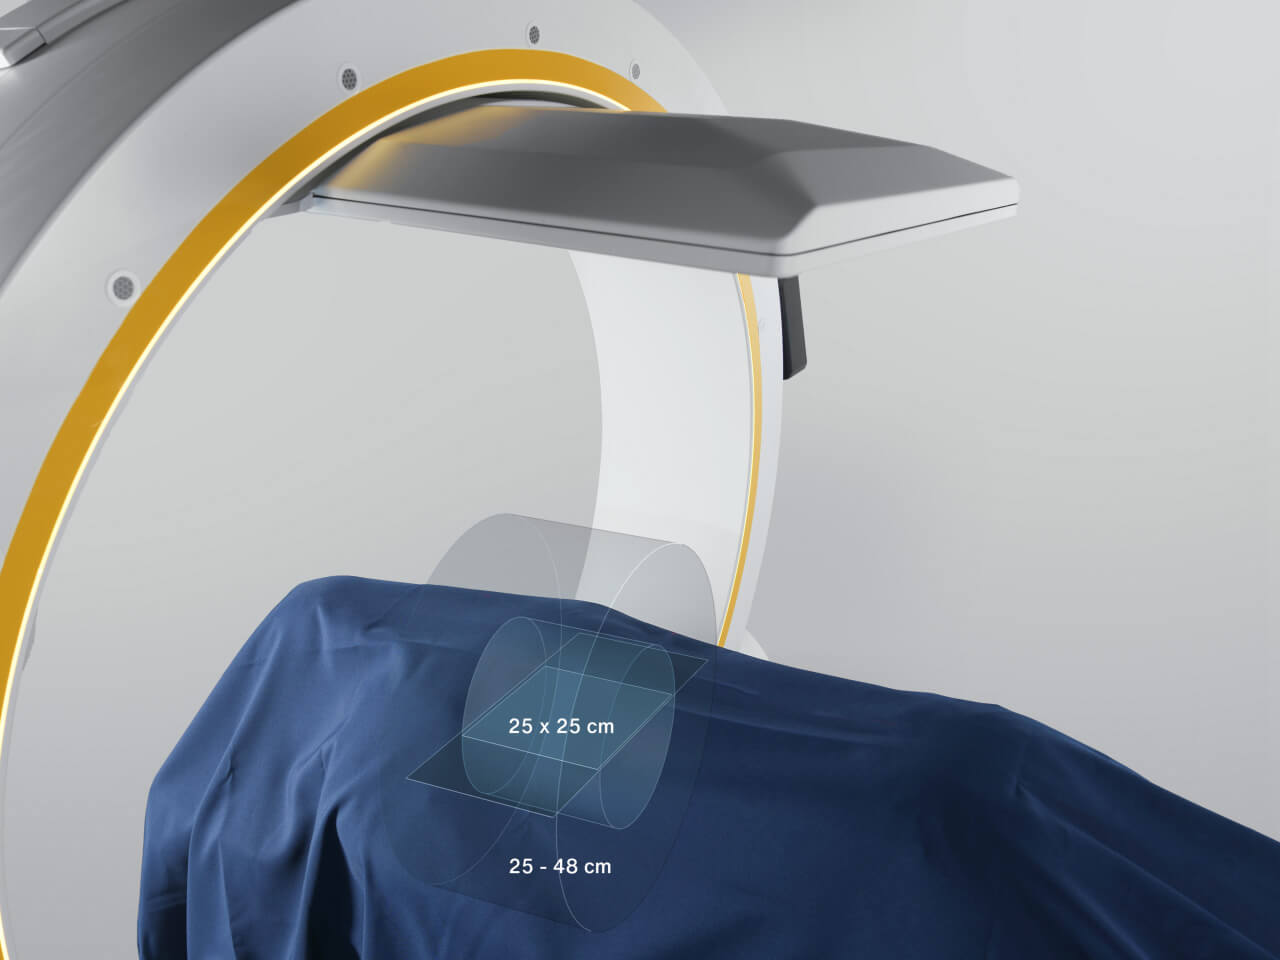 Brainlab Loop-X conebeam-ct overview field of view